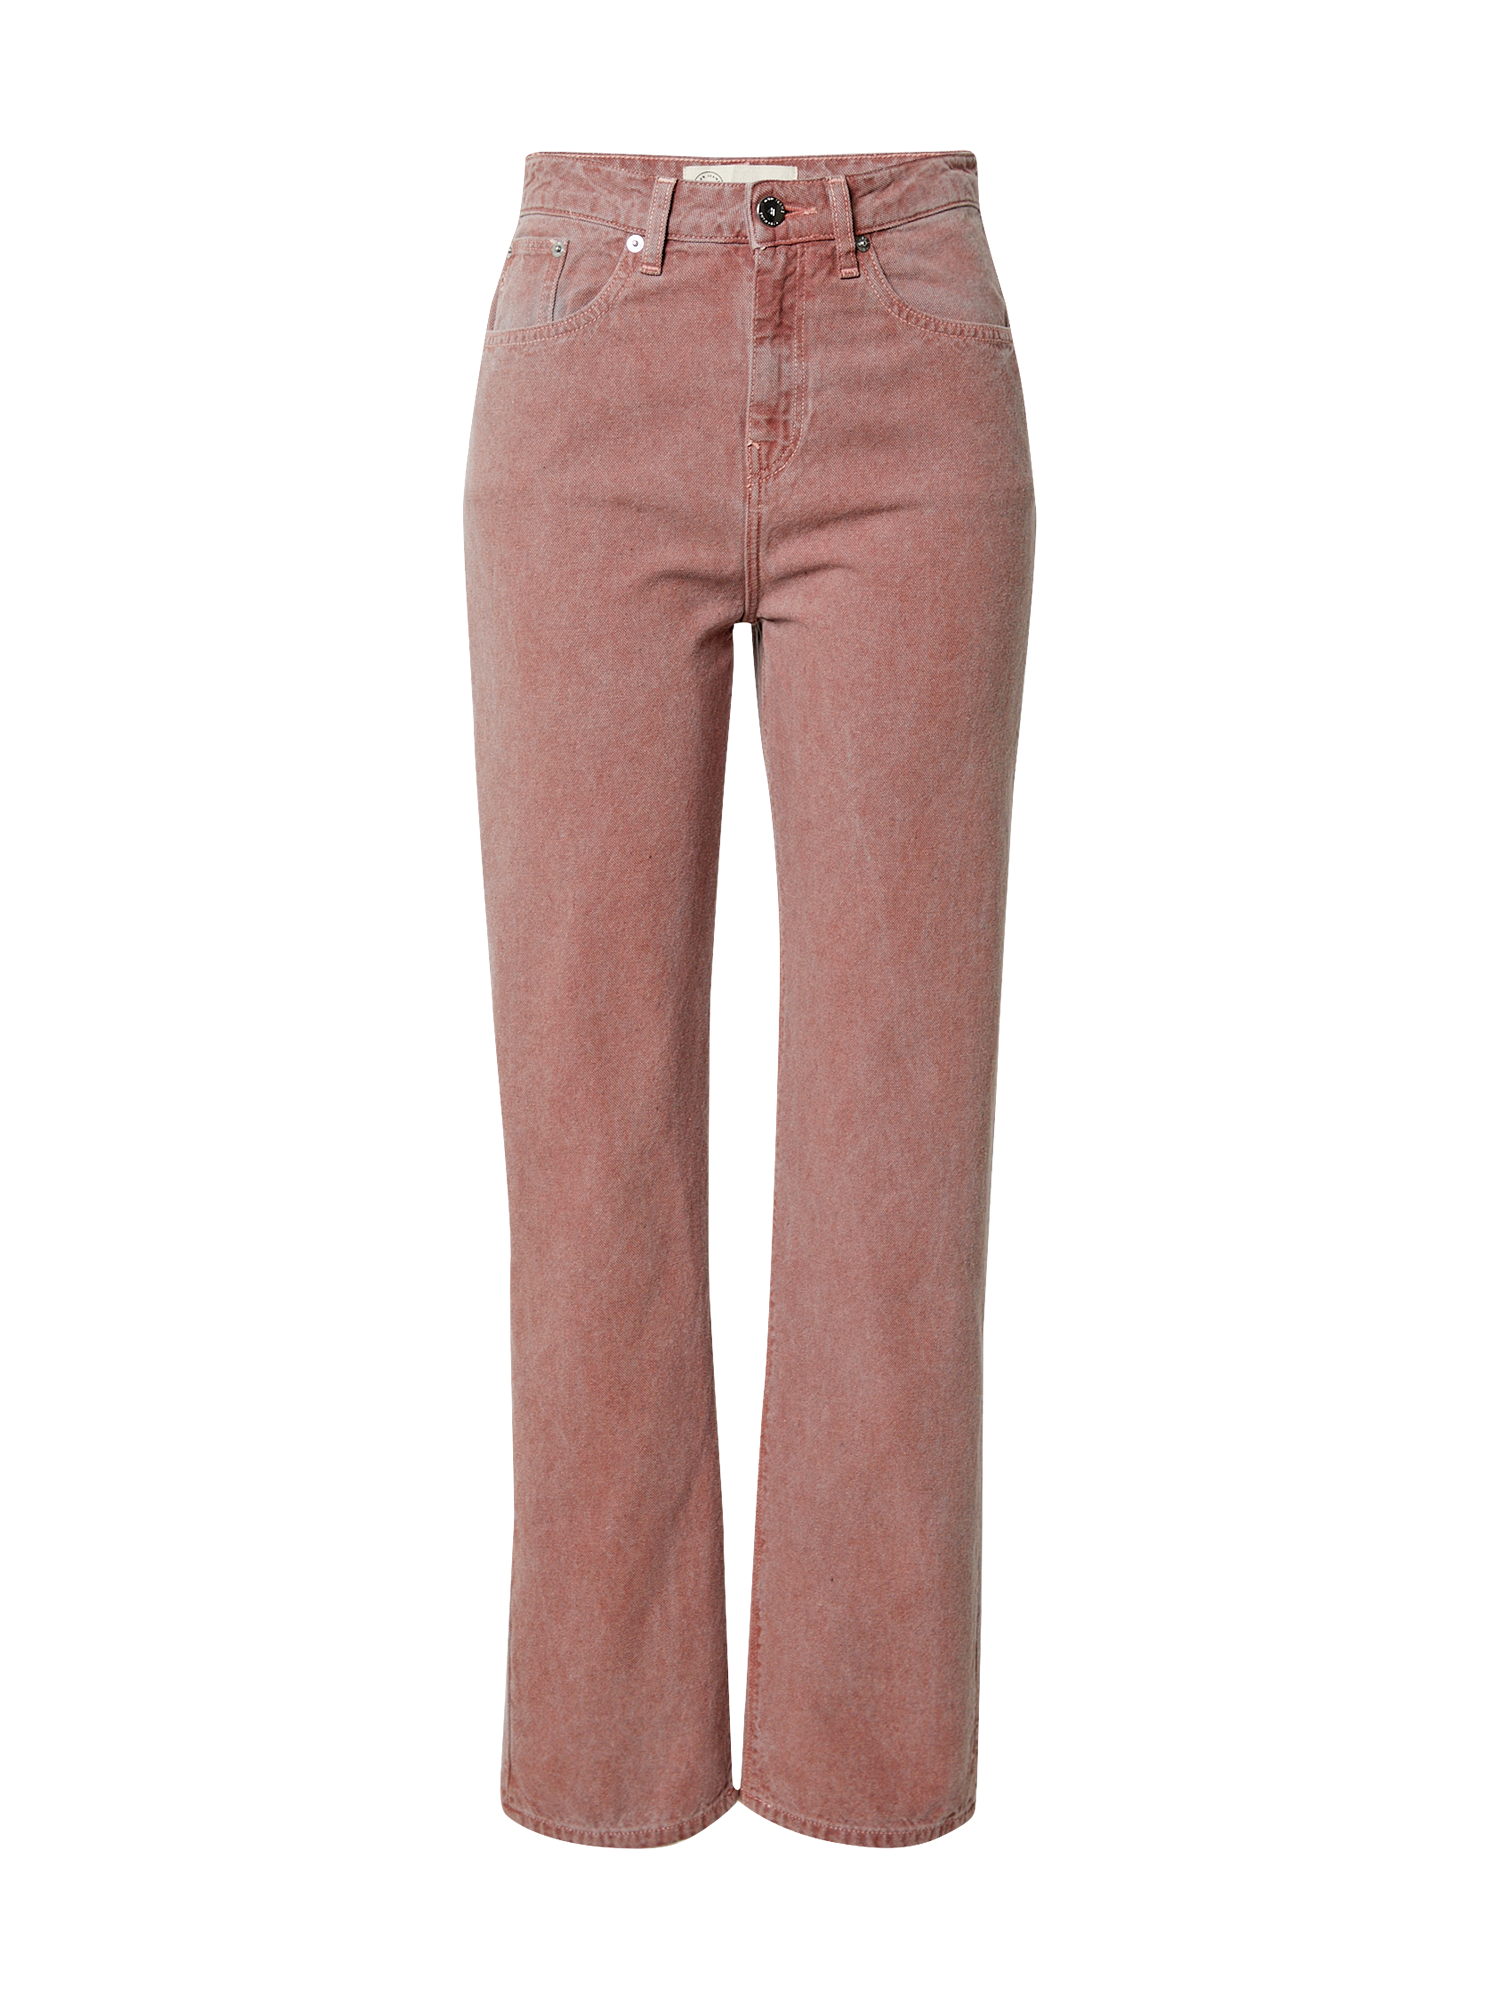 MUD Jeans Jeans Relax Rose in Marrone 